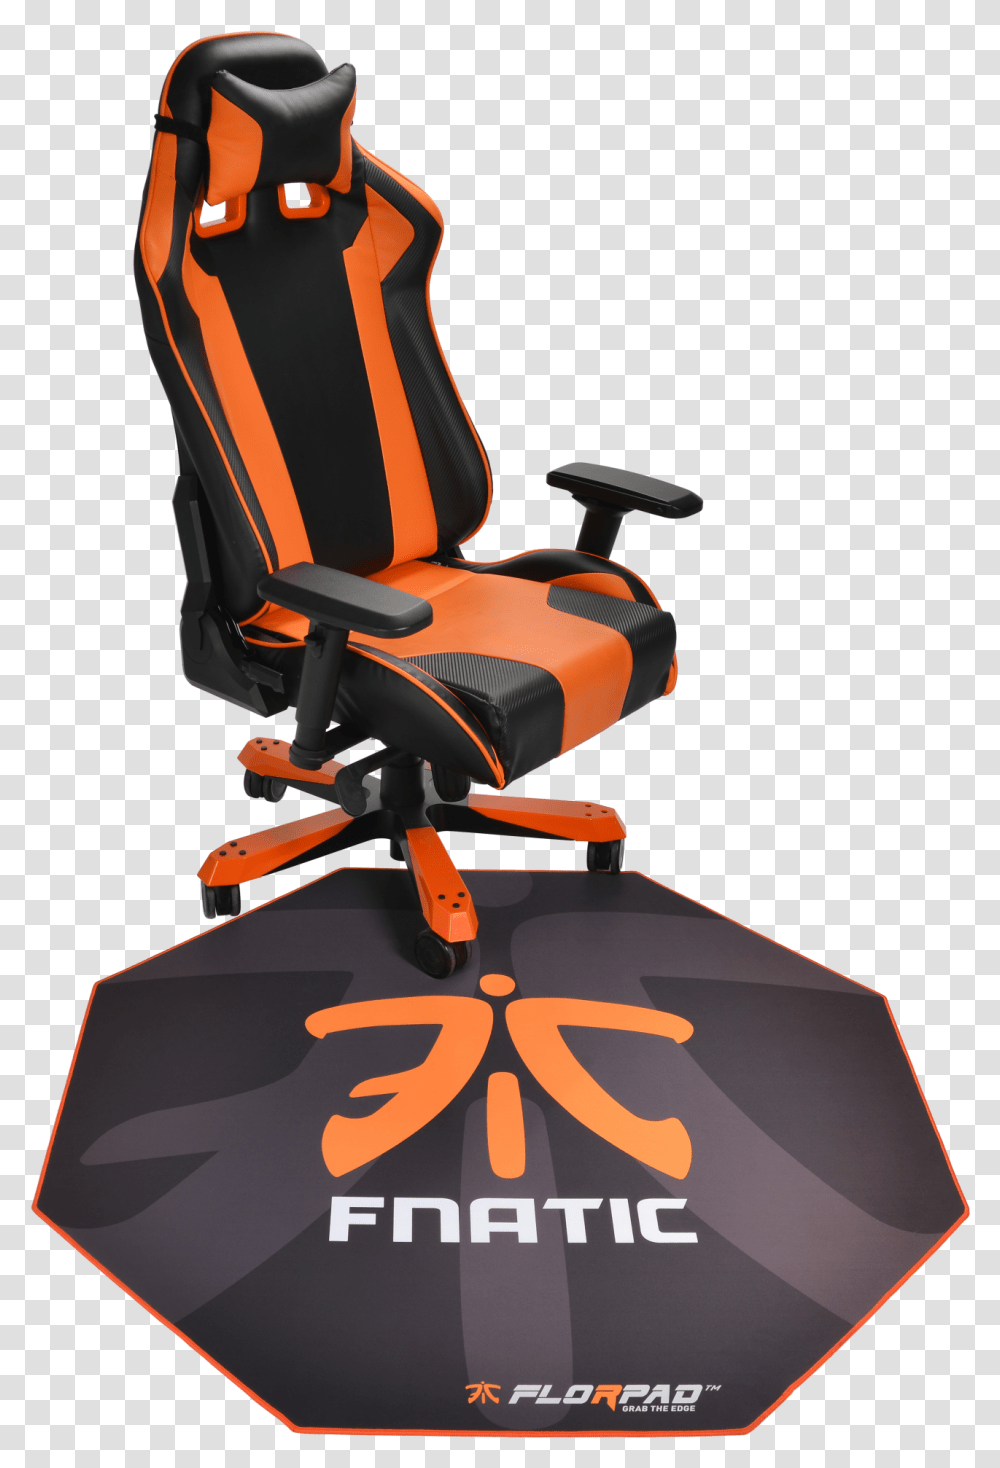 Download Florpad Fnatic Gamer Fnatic Gaming Chair, Furniture, Cushion, Headrest Transparent Png